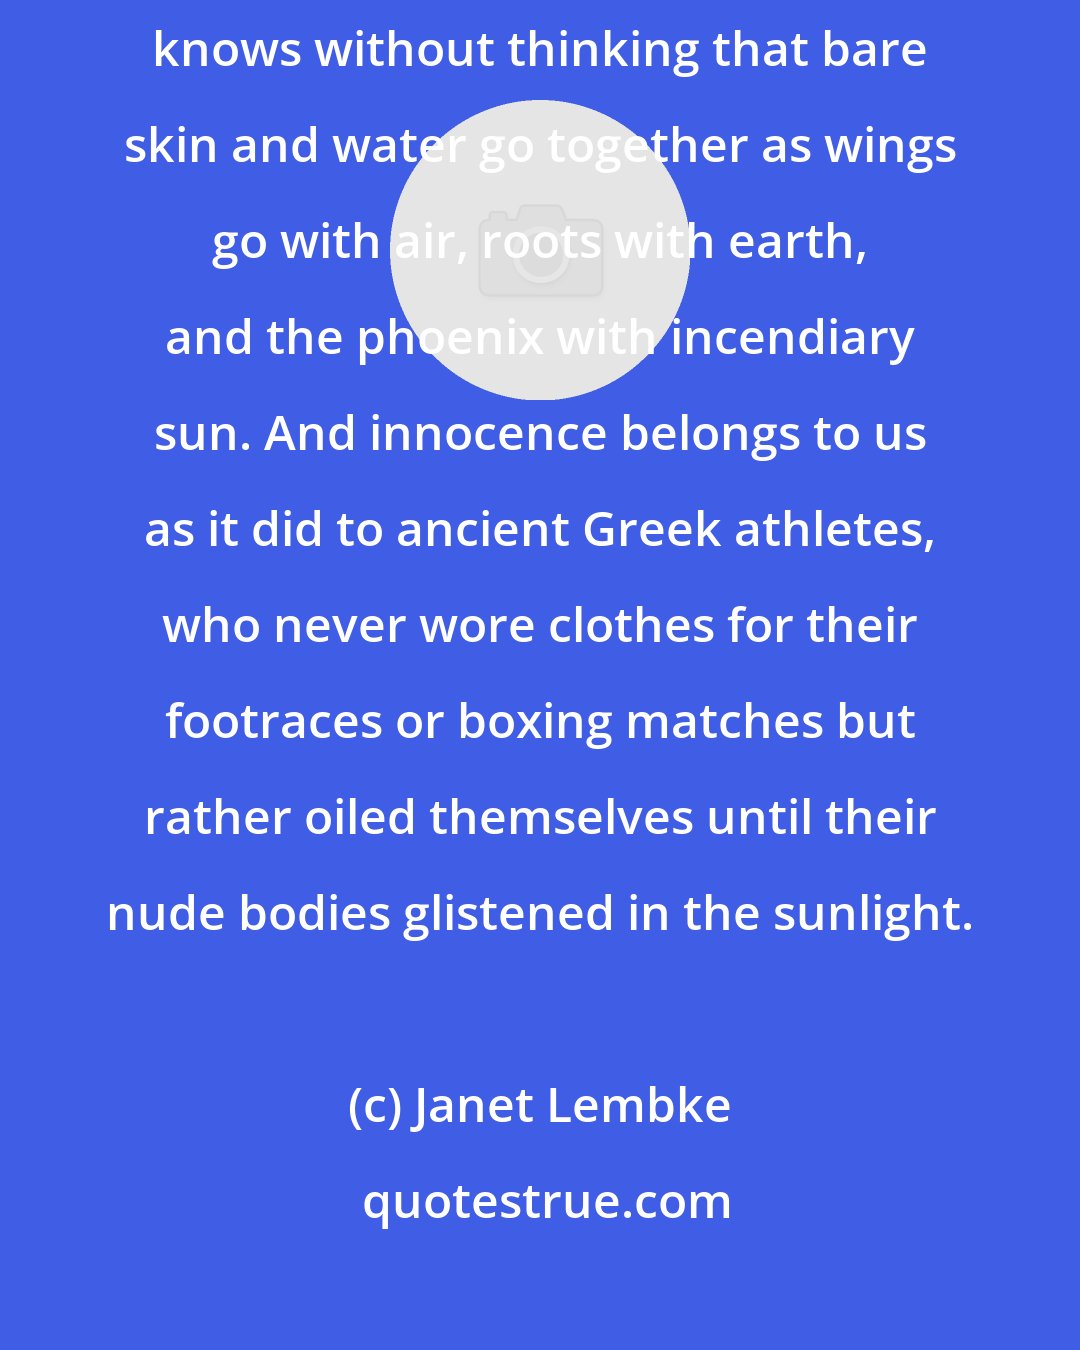 Janet Lembke: Truth is, most of us contain a splashing, giggling, squealing child who knows without thinking that bare skin and water go together as wings go with air, roots with earth, and the phoenix with incendiary sun. And innocence belongs to us as it did to ancient Greek athletes, who never wore clothes for their footraces or boxing matches but rather oiled themselves until their nude bodies glistened in the sunlight.